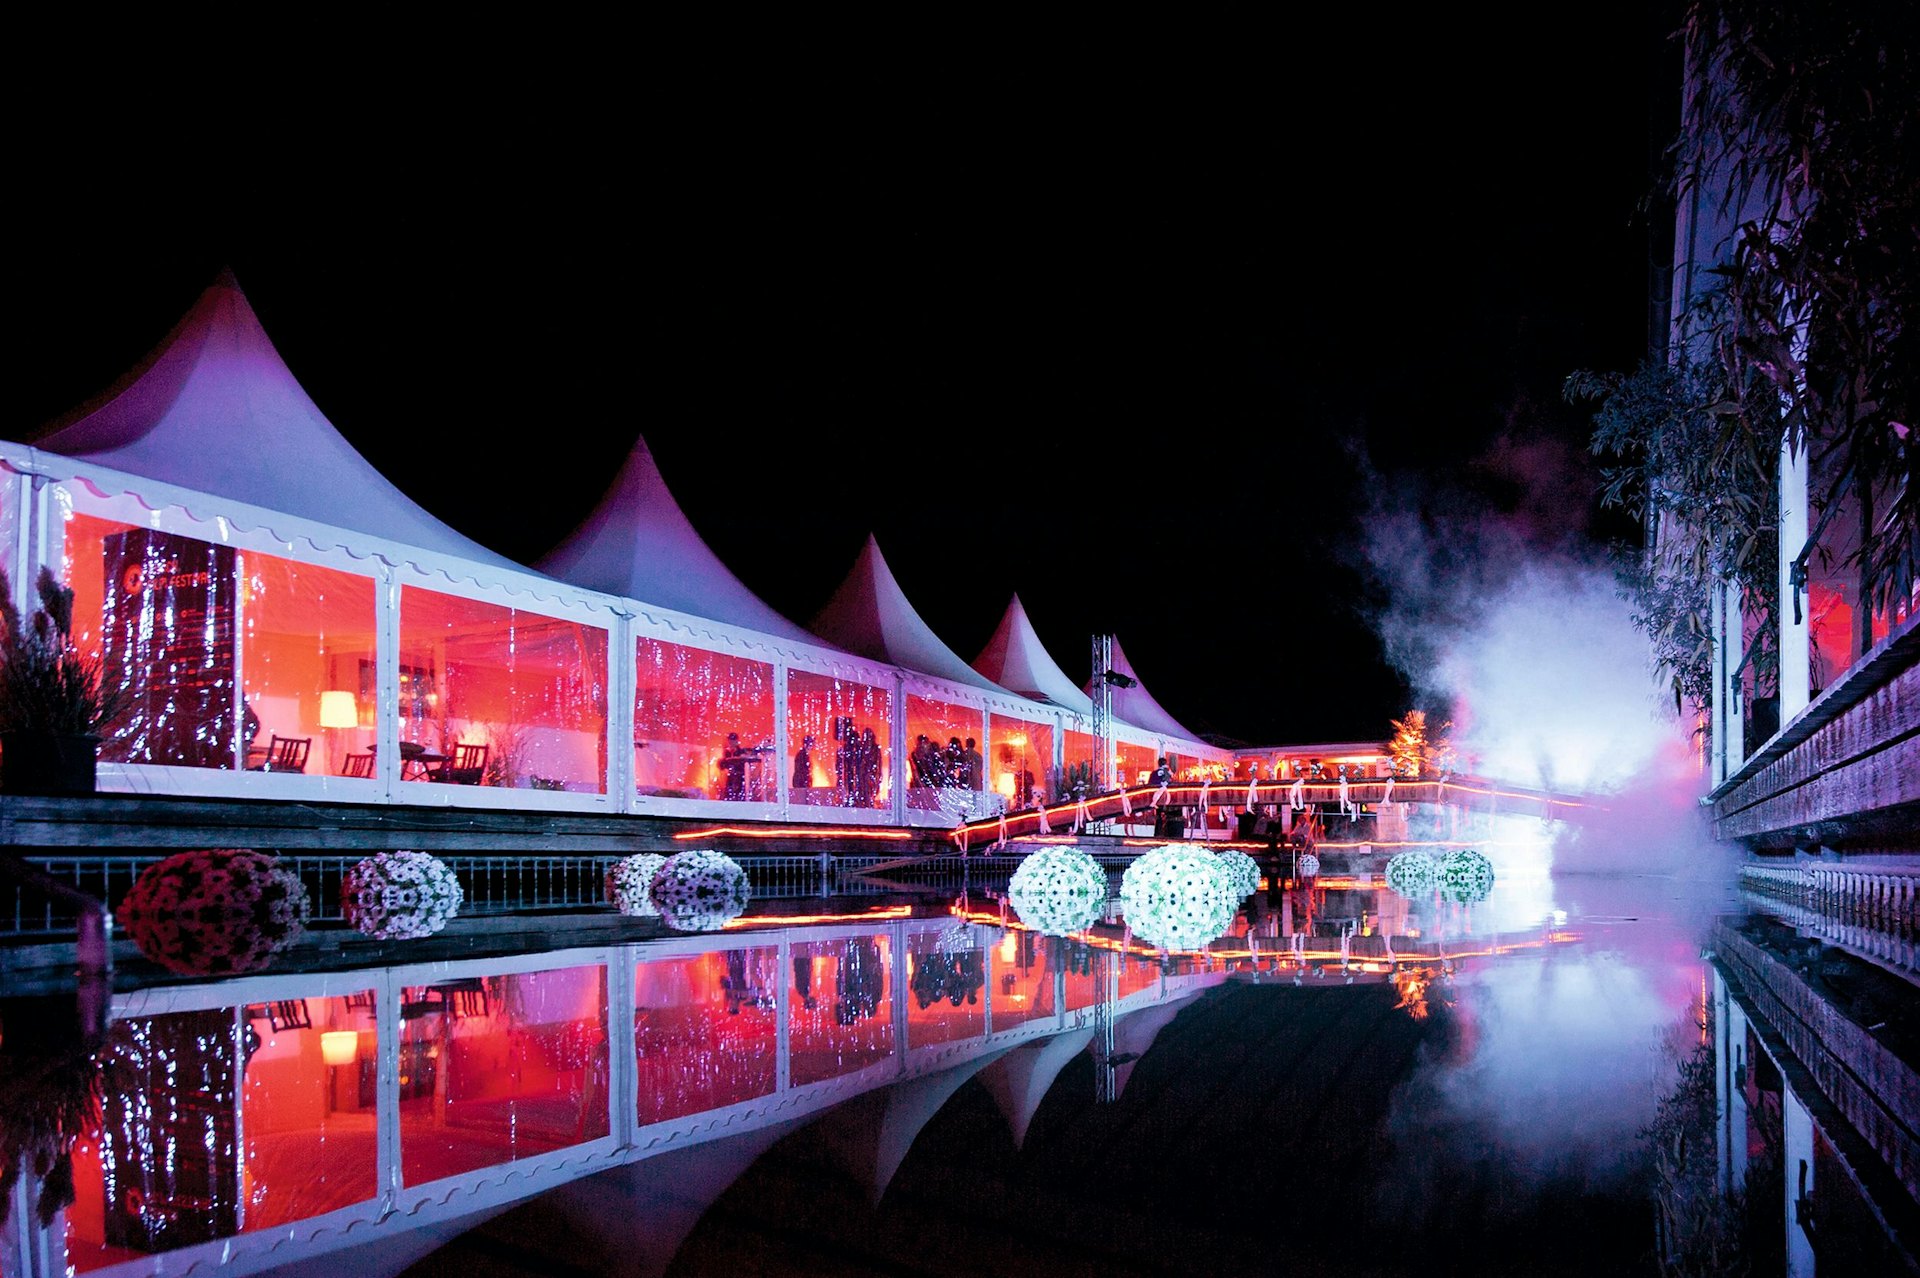 Picture of the Frauenbadi during an event at night.